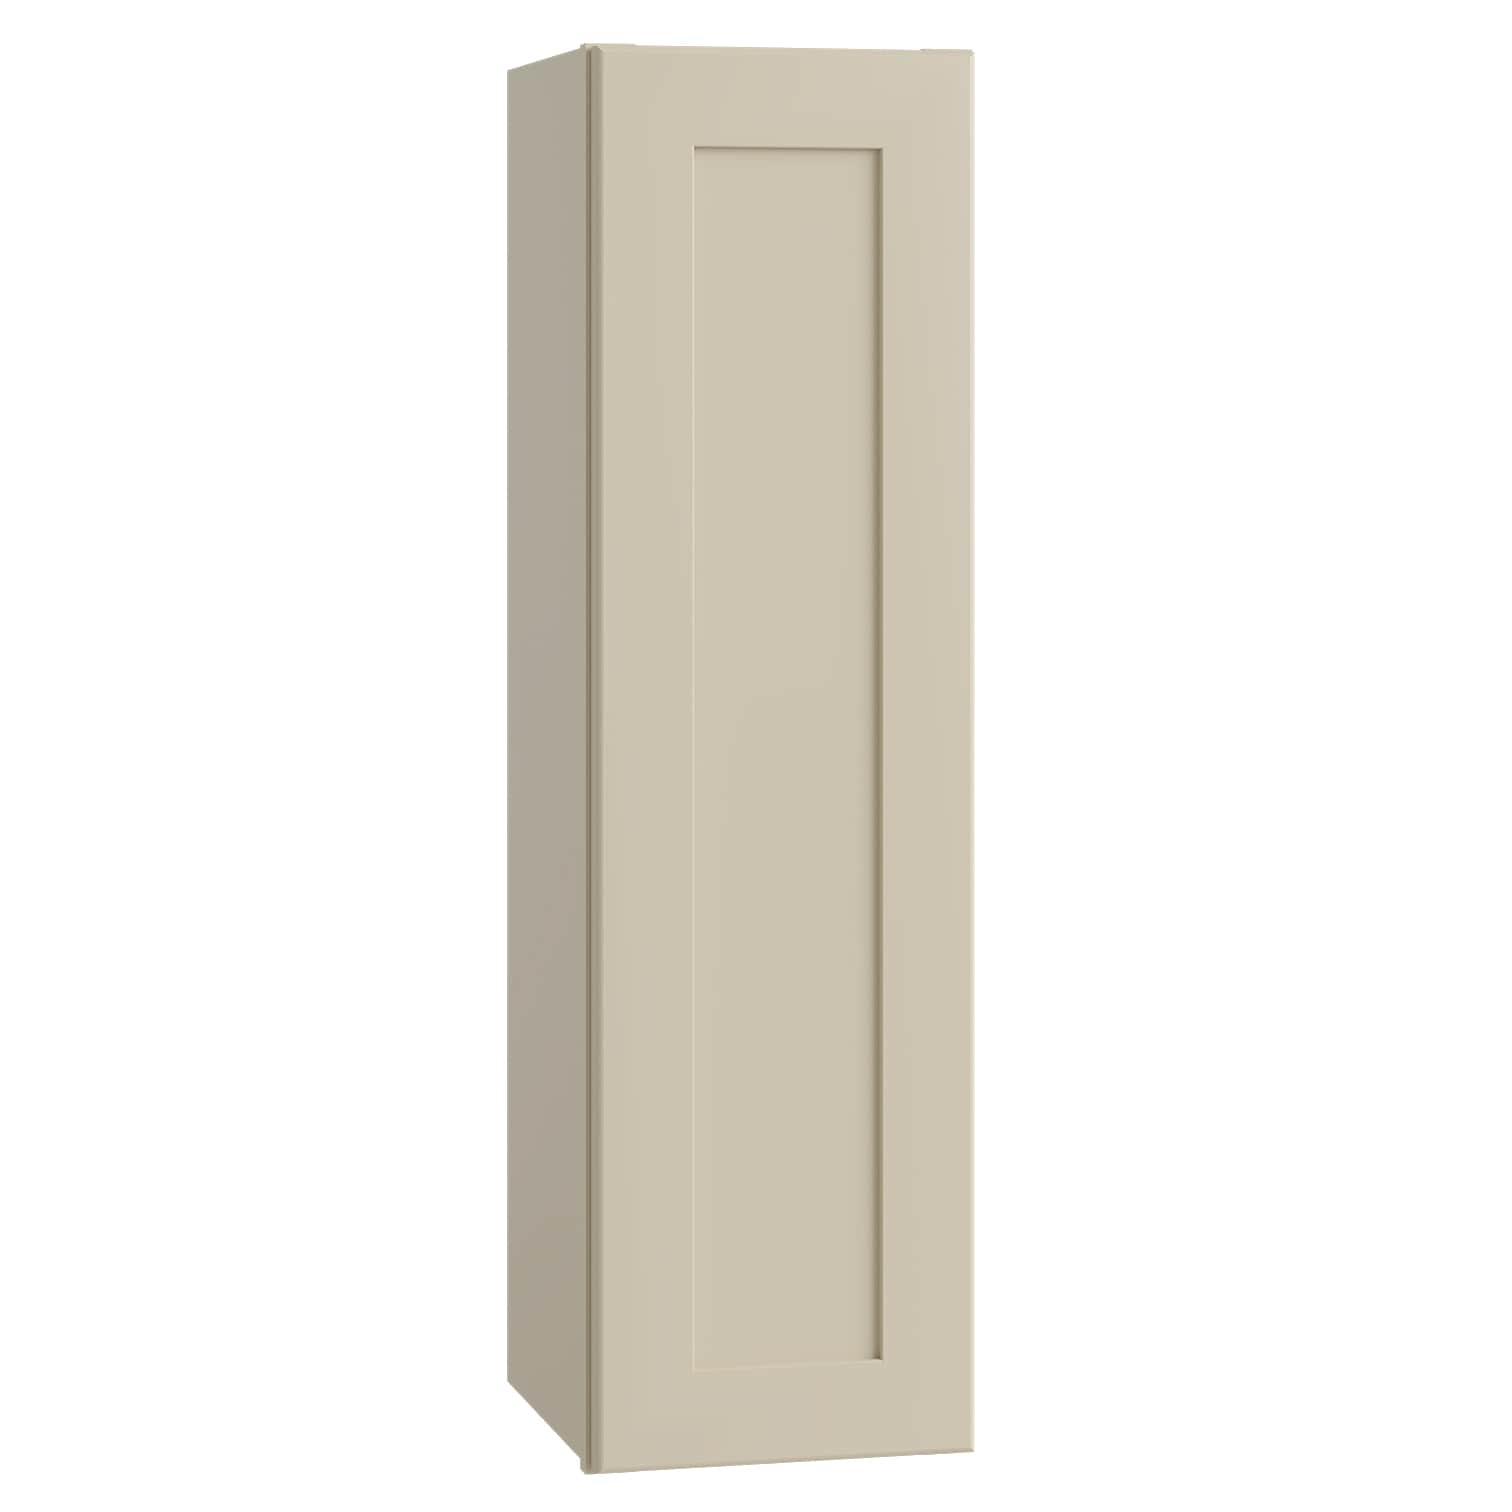 Luxxe Cabinetry 9-in W x 42-in H x 12-in D Norfolk Blended Cream Painted Door Wall Fully Assembled Semi-custom Cabinet in Off-White | W0942L-NBC